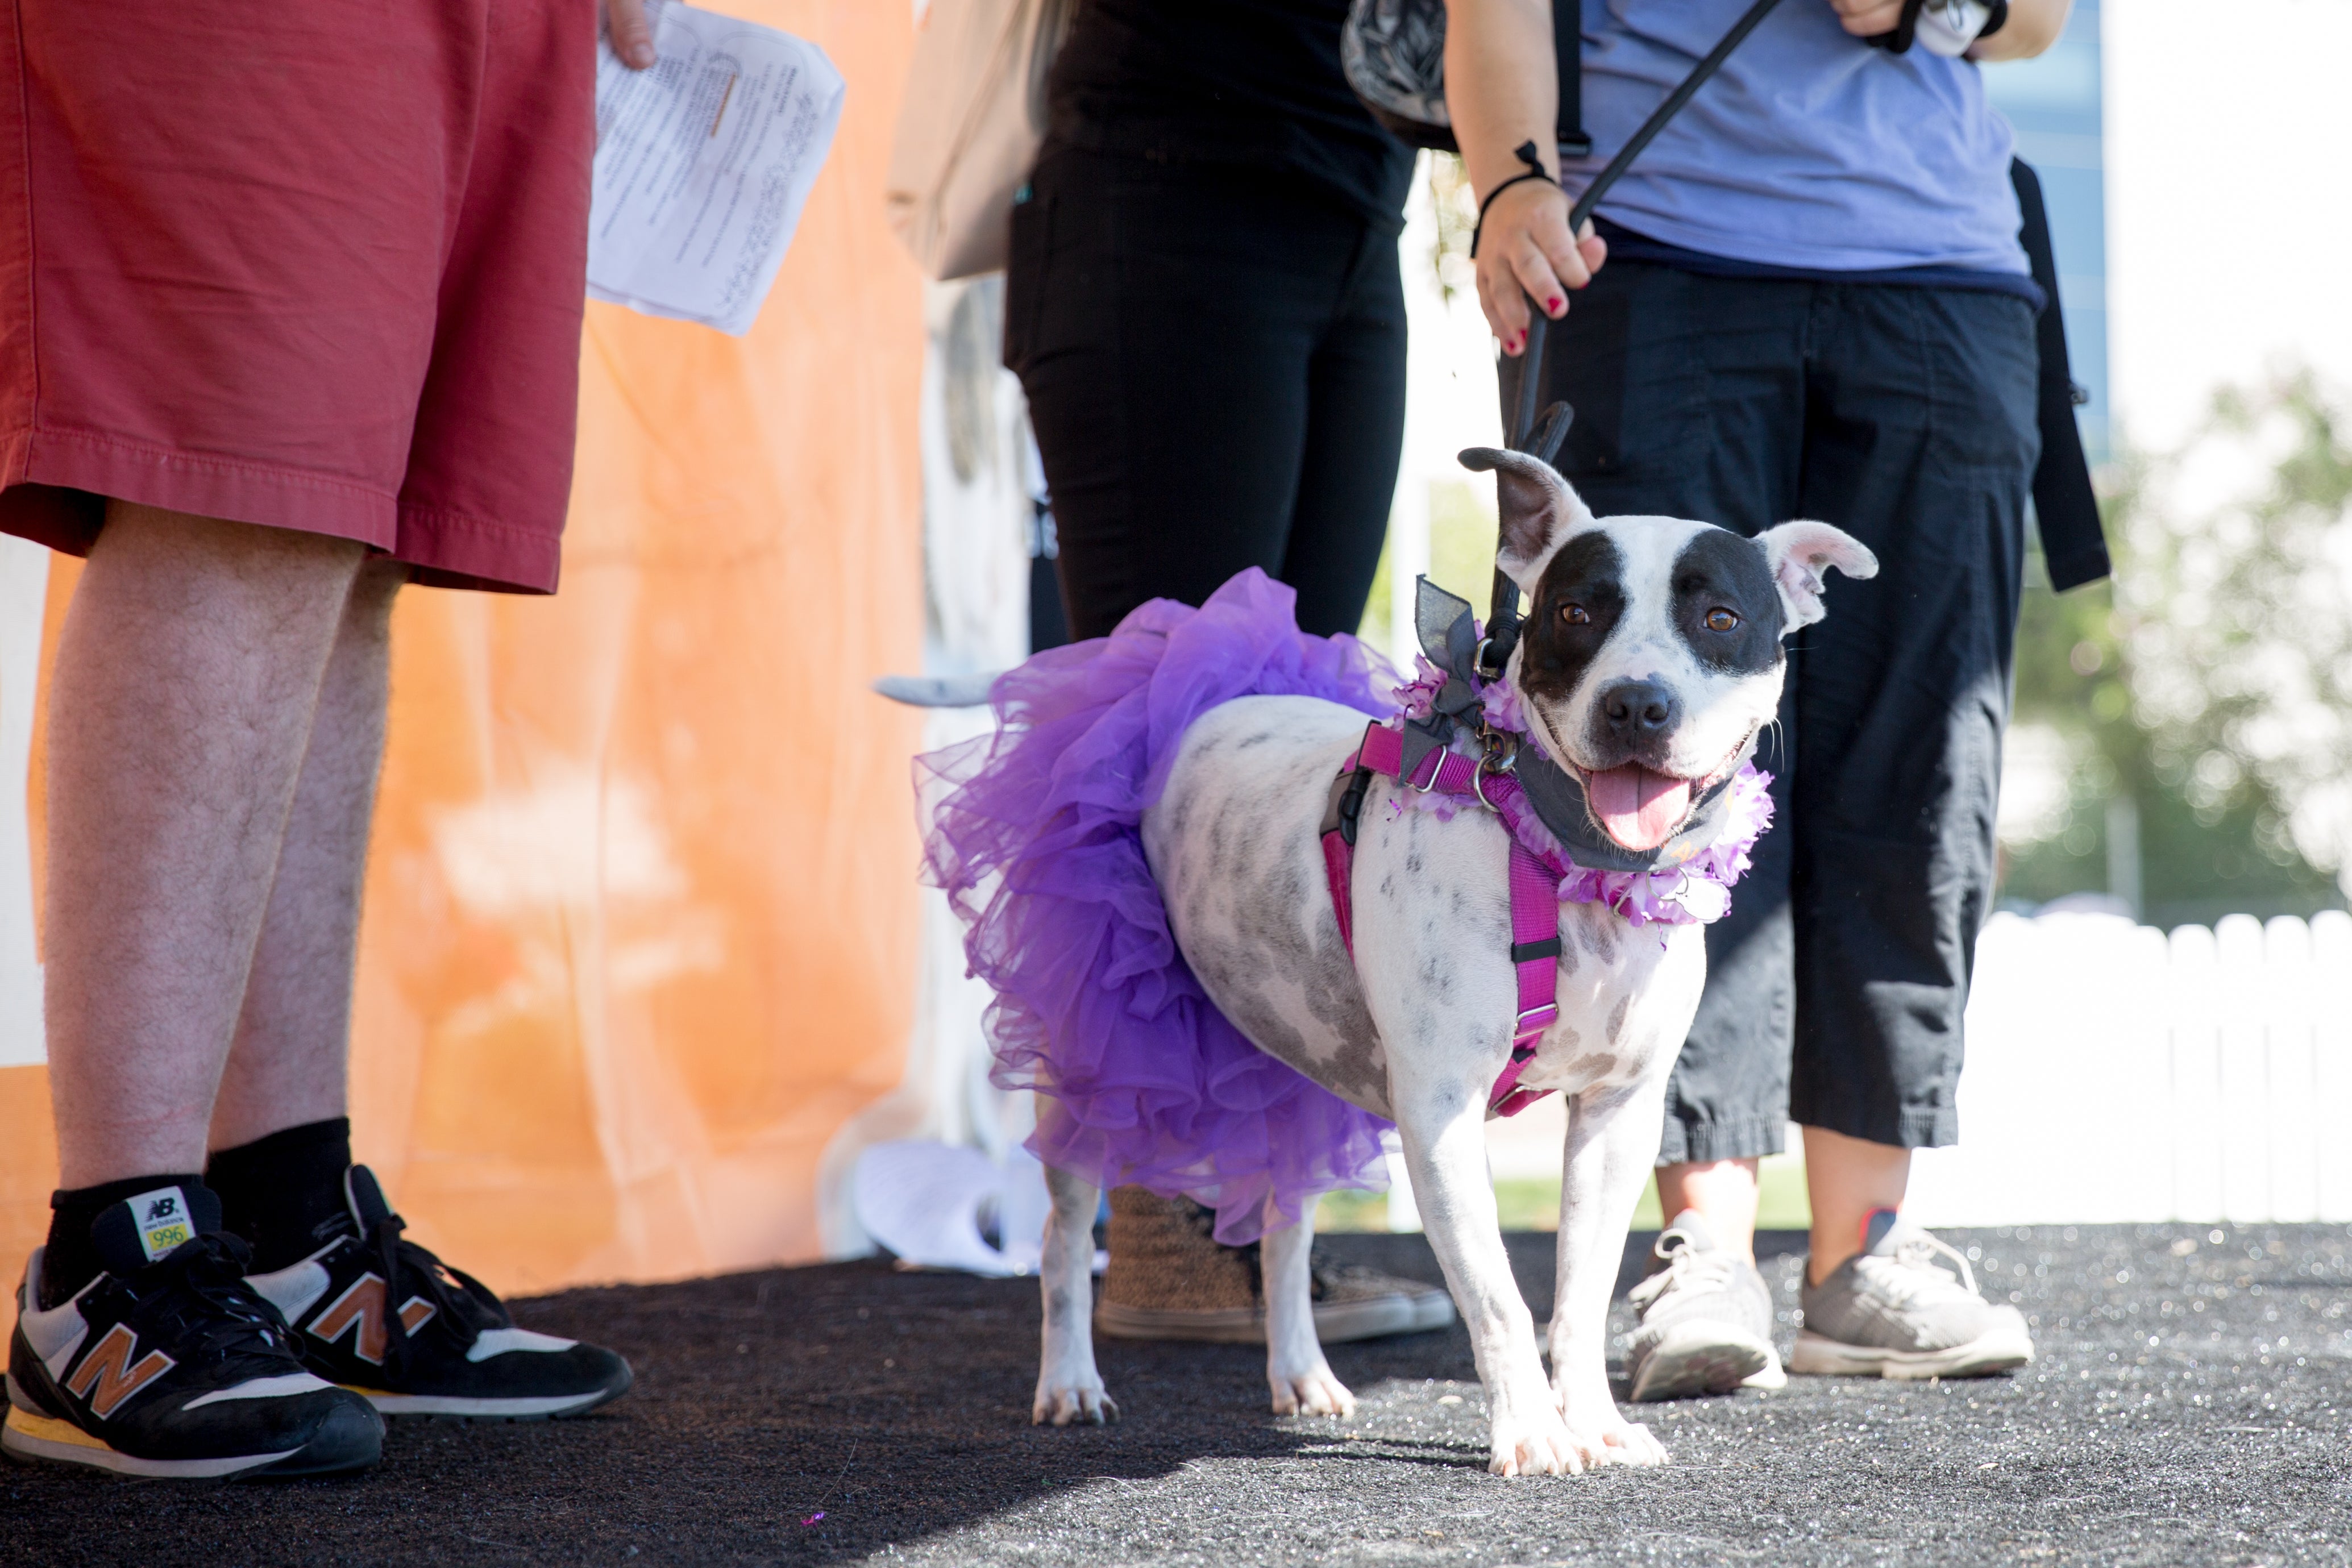 During Strut Your Mutt, participants and their pooches dress up in fun costumes and step out to raise lifesaving funds for homeless pets in their communities.